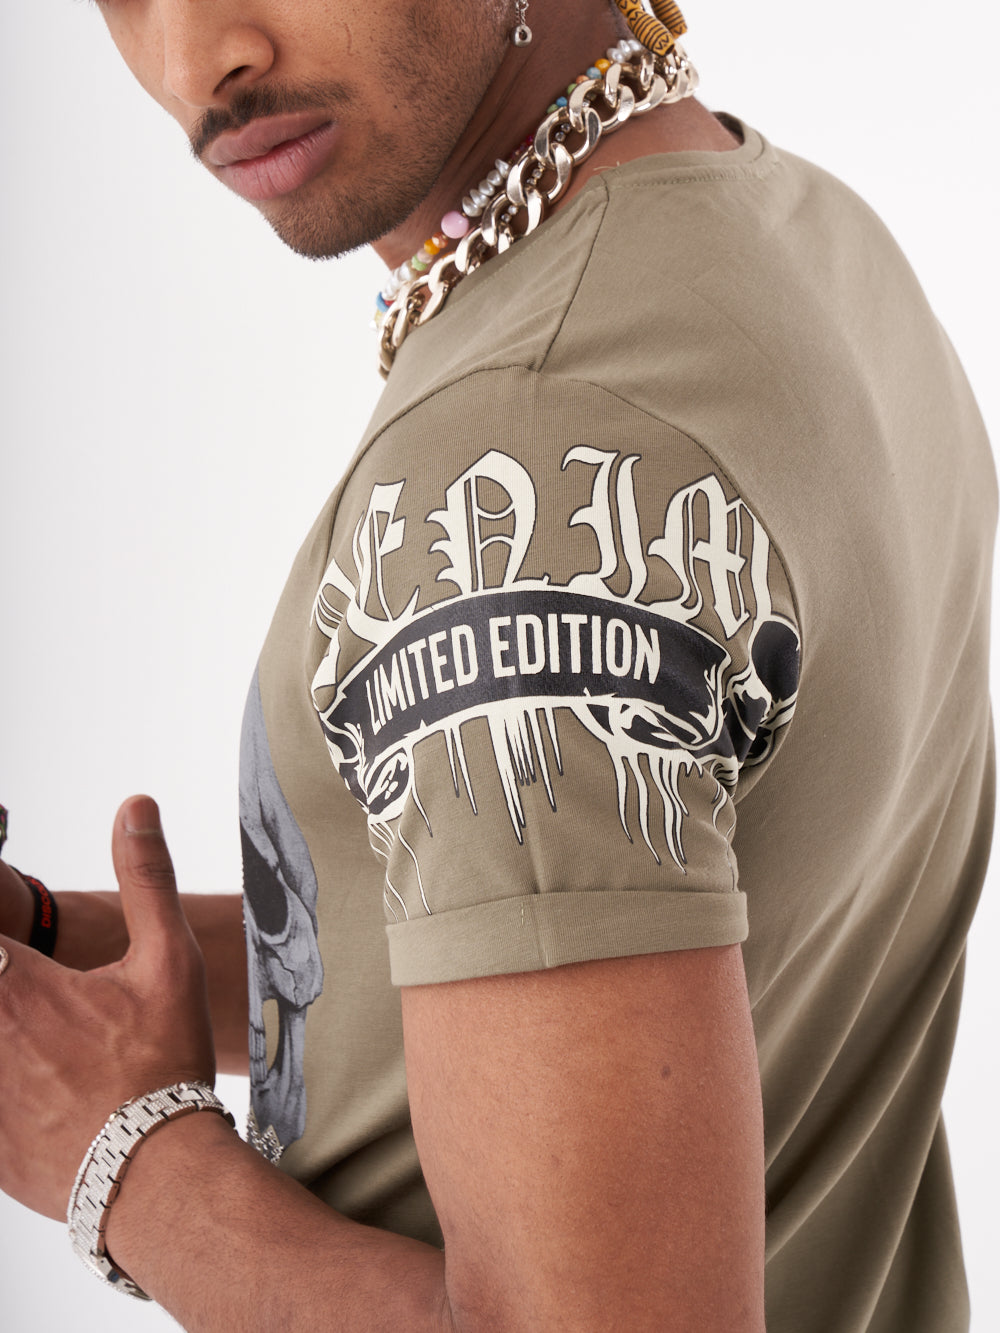 A limited edition, slim fit SKULL CRUSHER T-SHIRT | GREEN featuring a skull design.